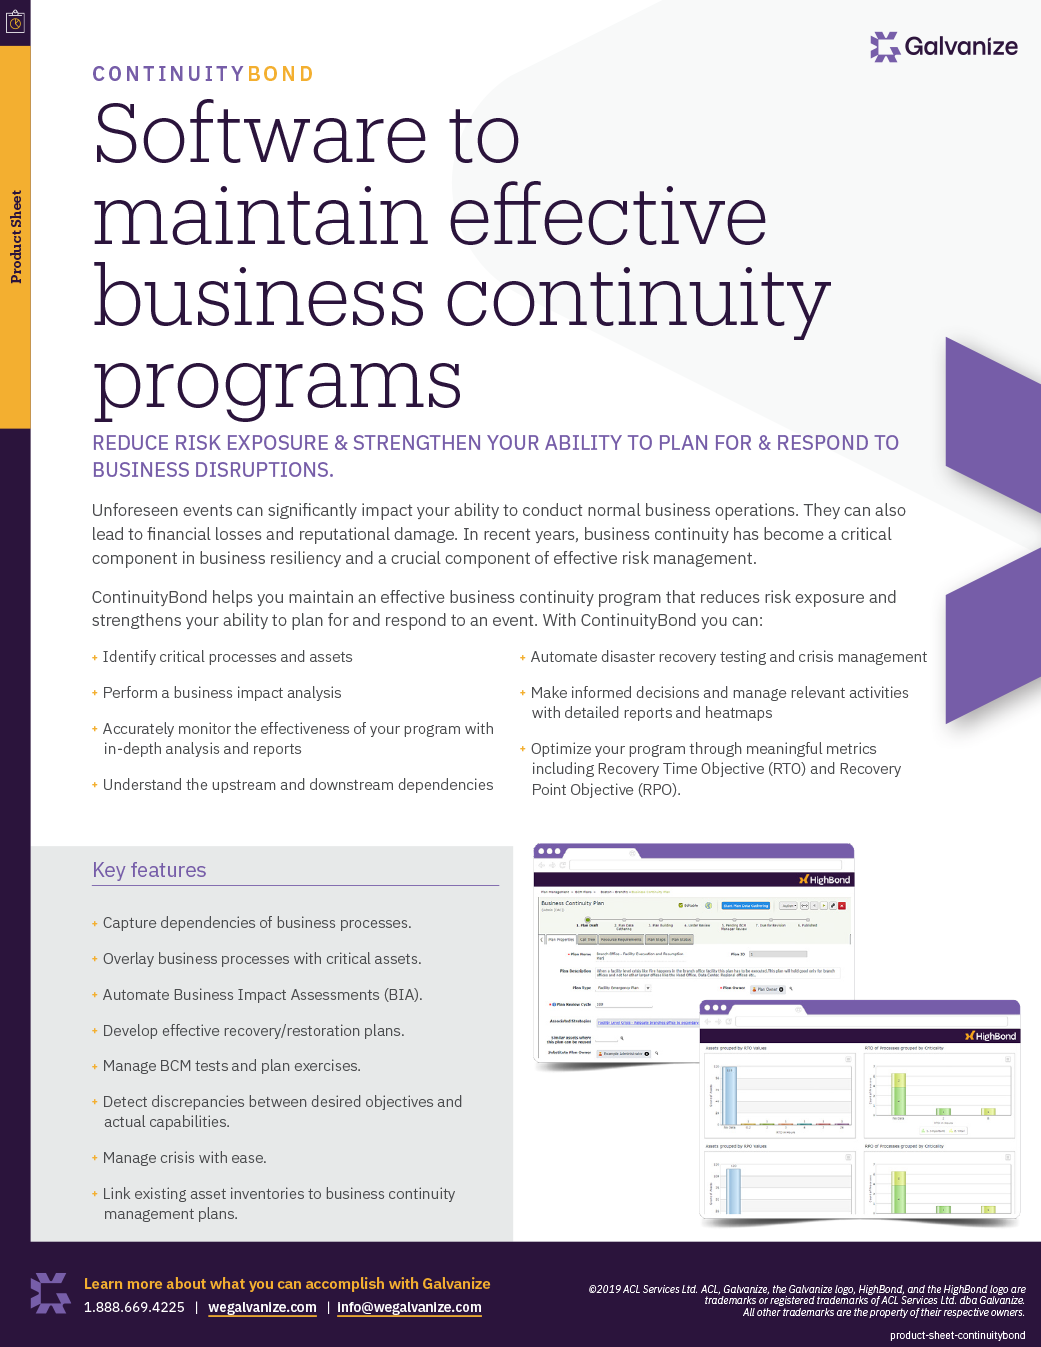 Software to maintain effective business continuity programs